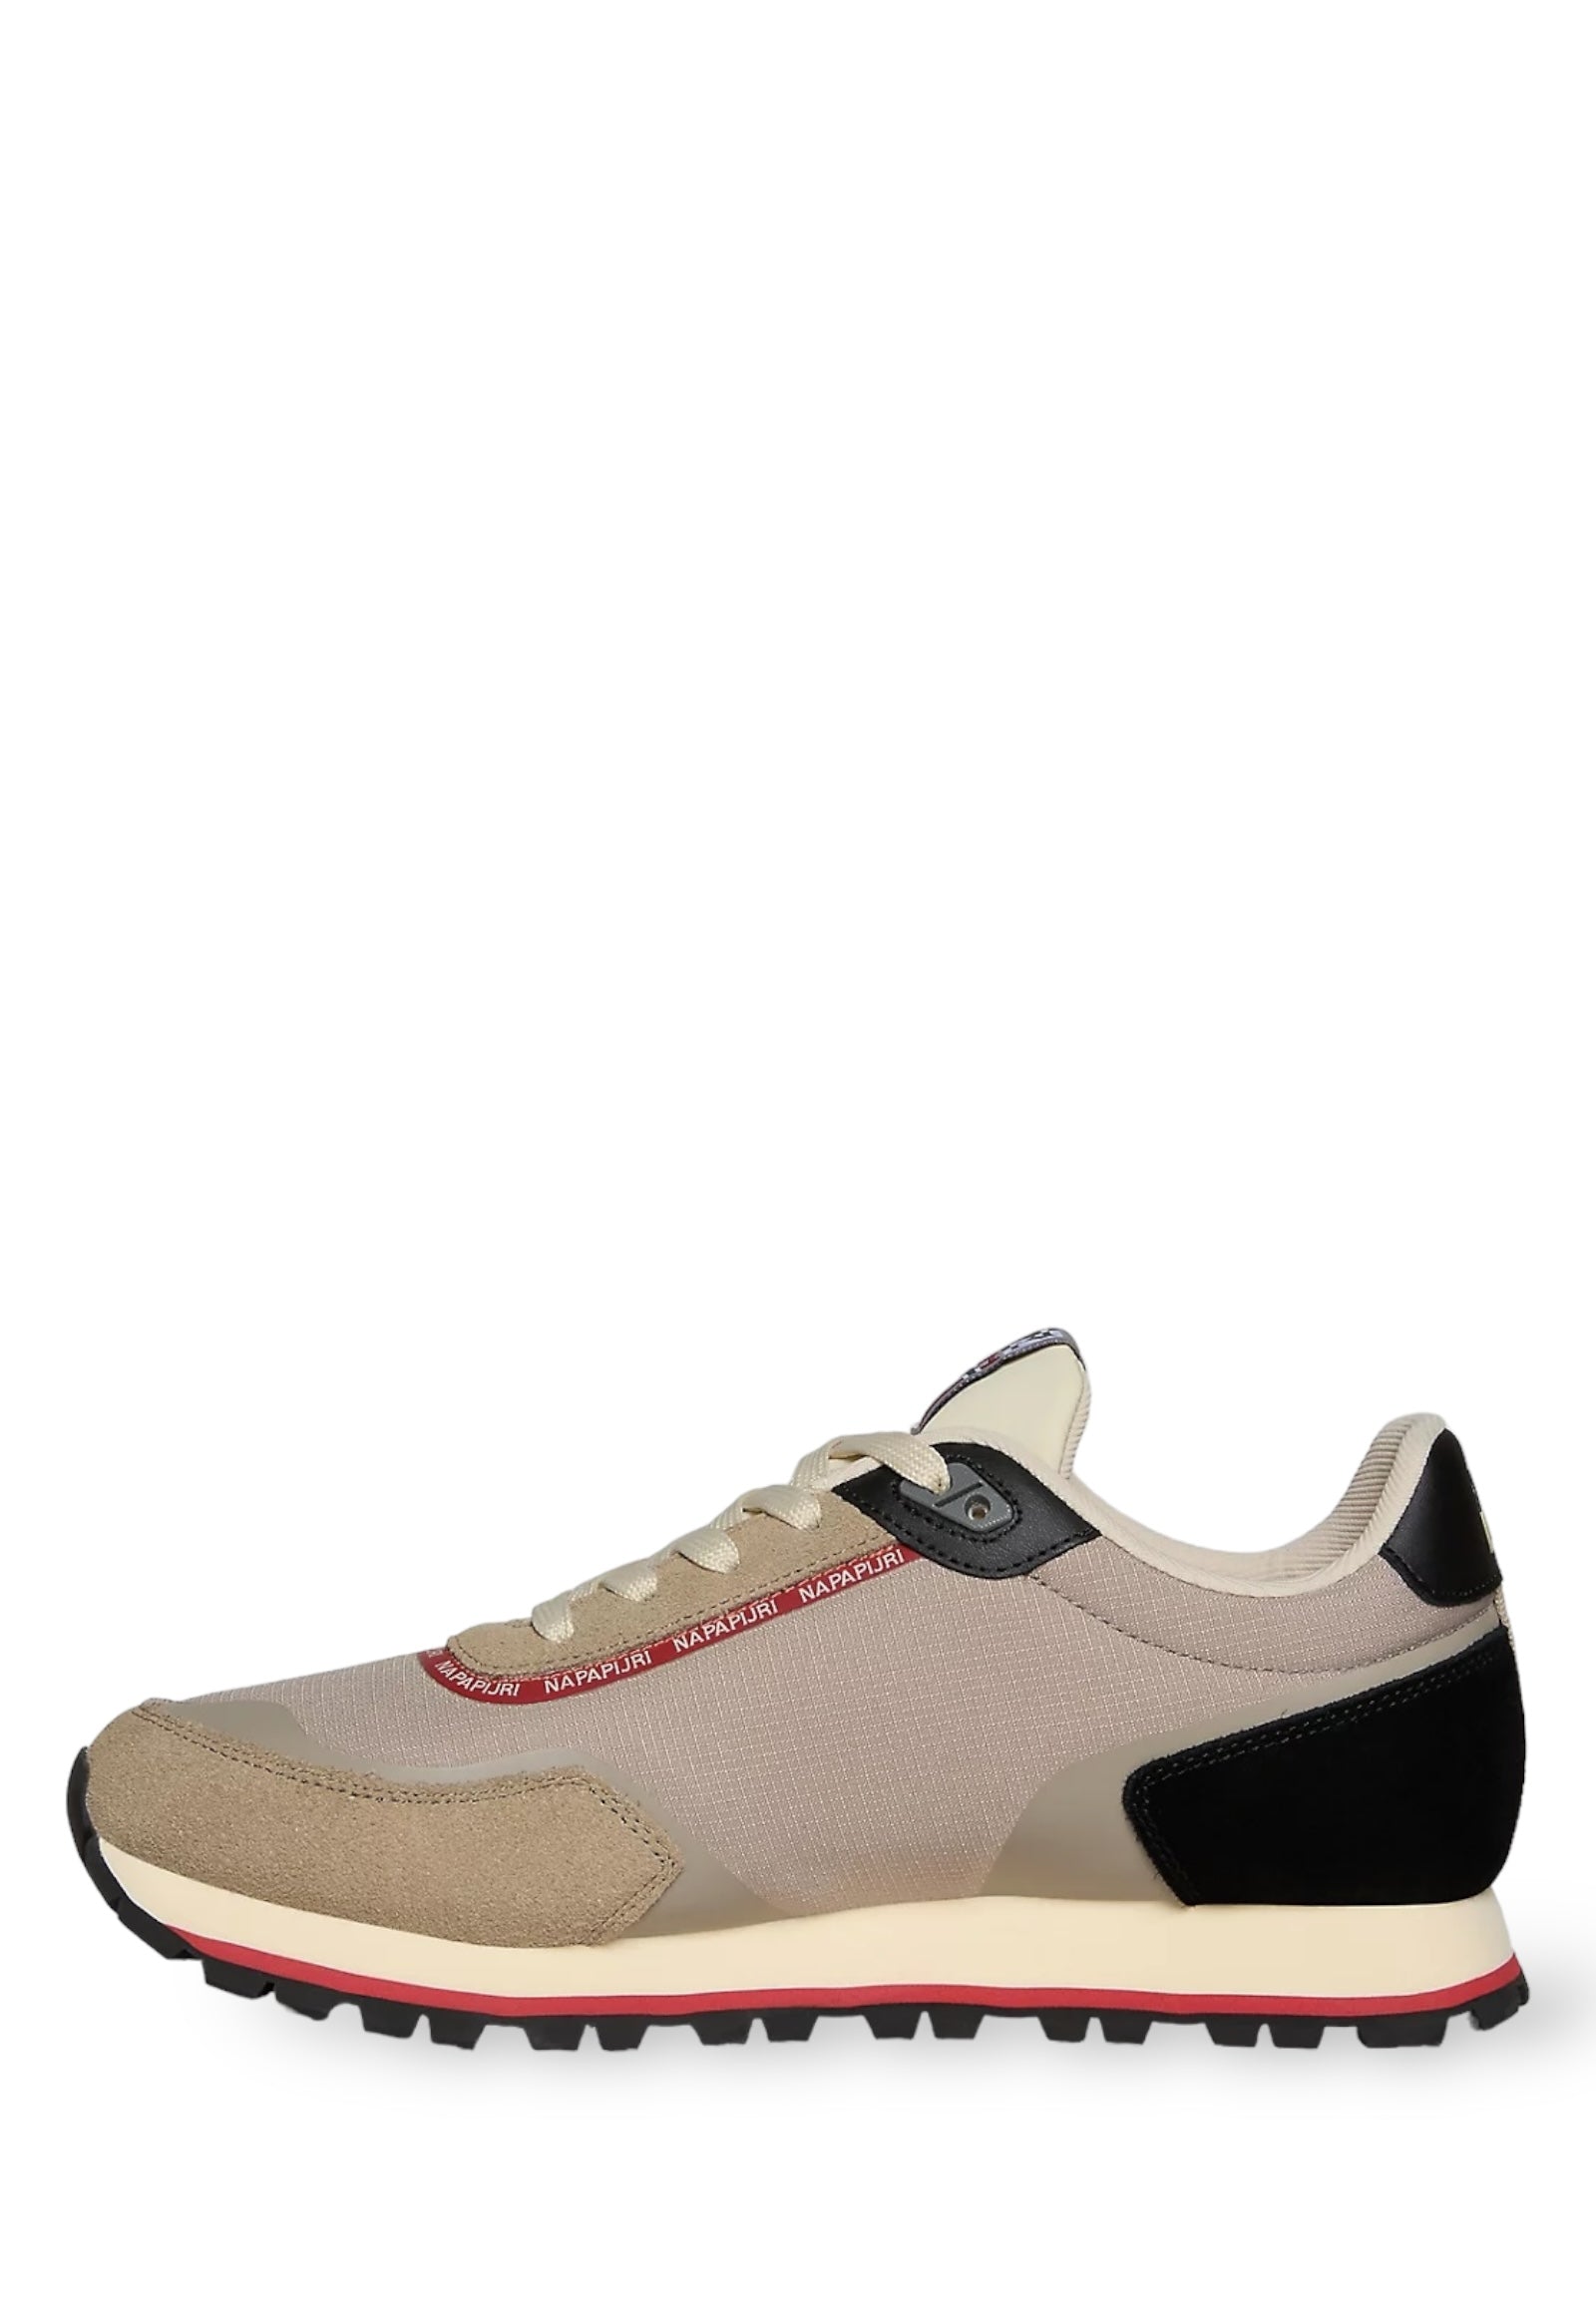 Sneakers Np0a4i7c Mineral Beige